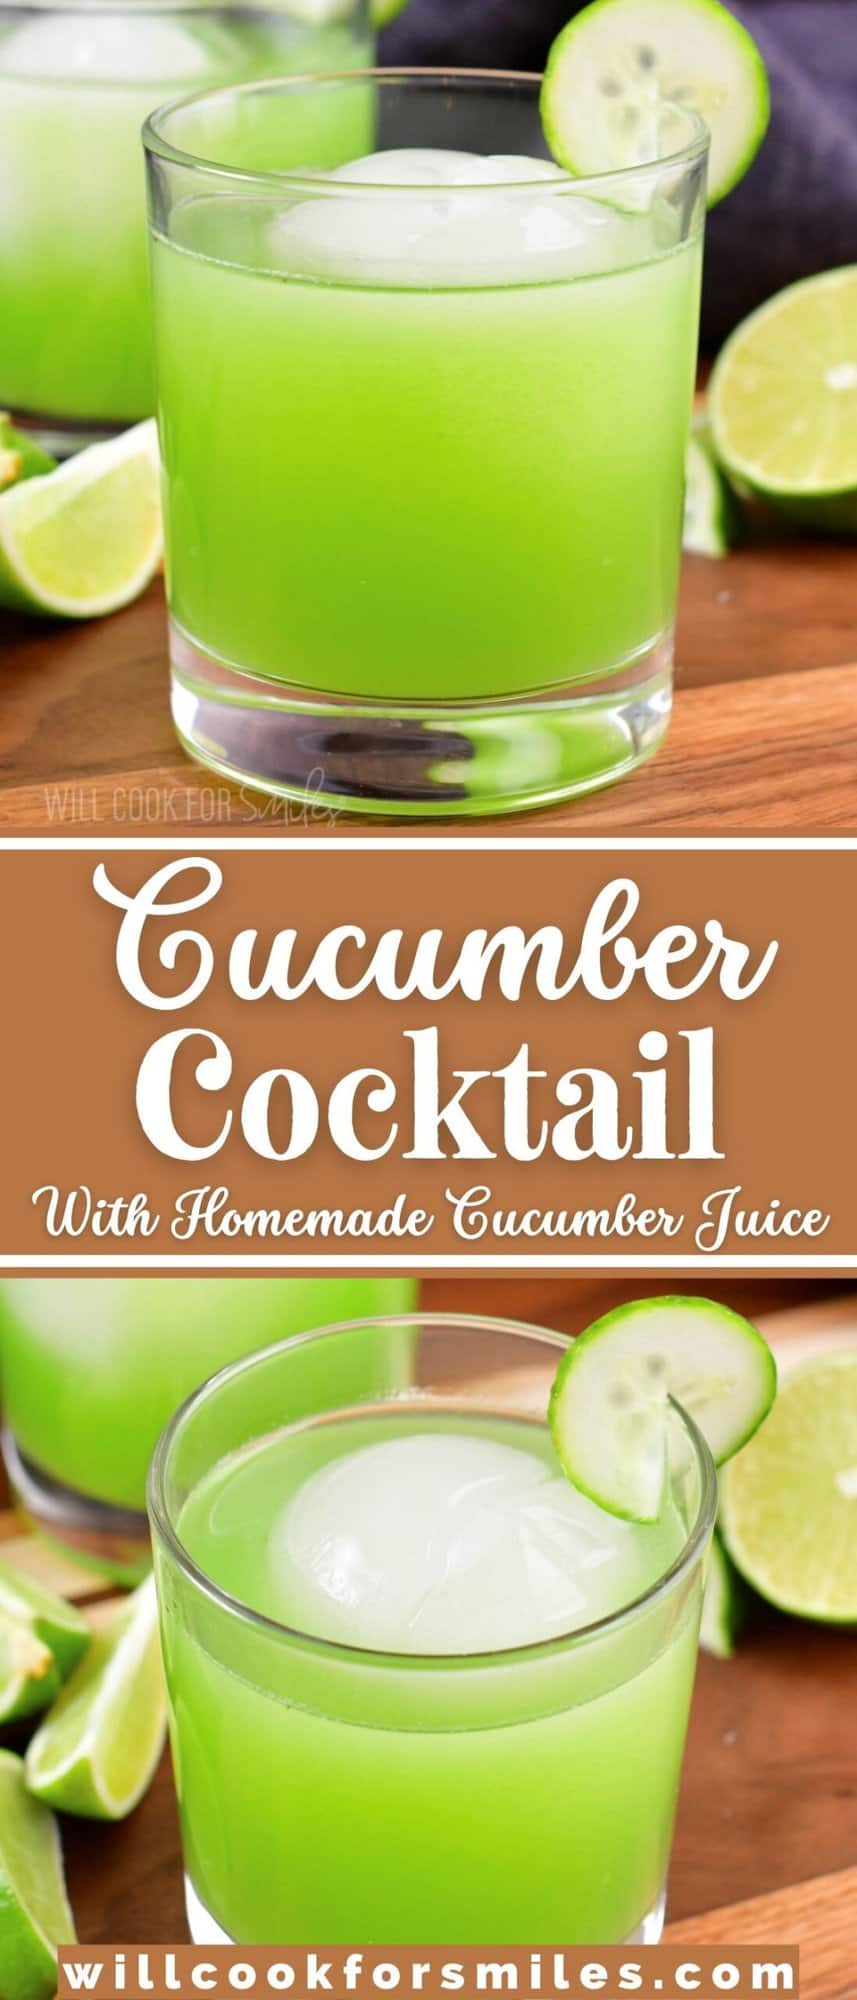 collage of two images of the cucumber cocktail up close.